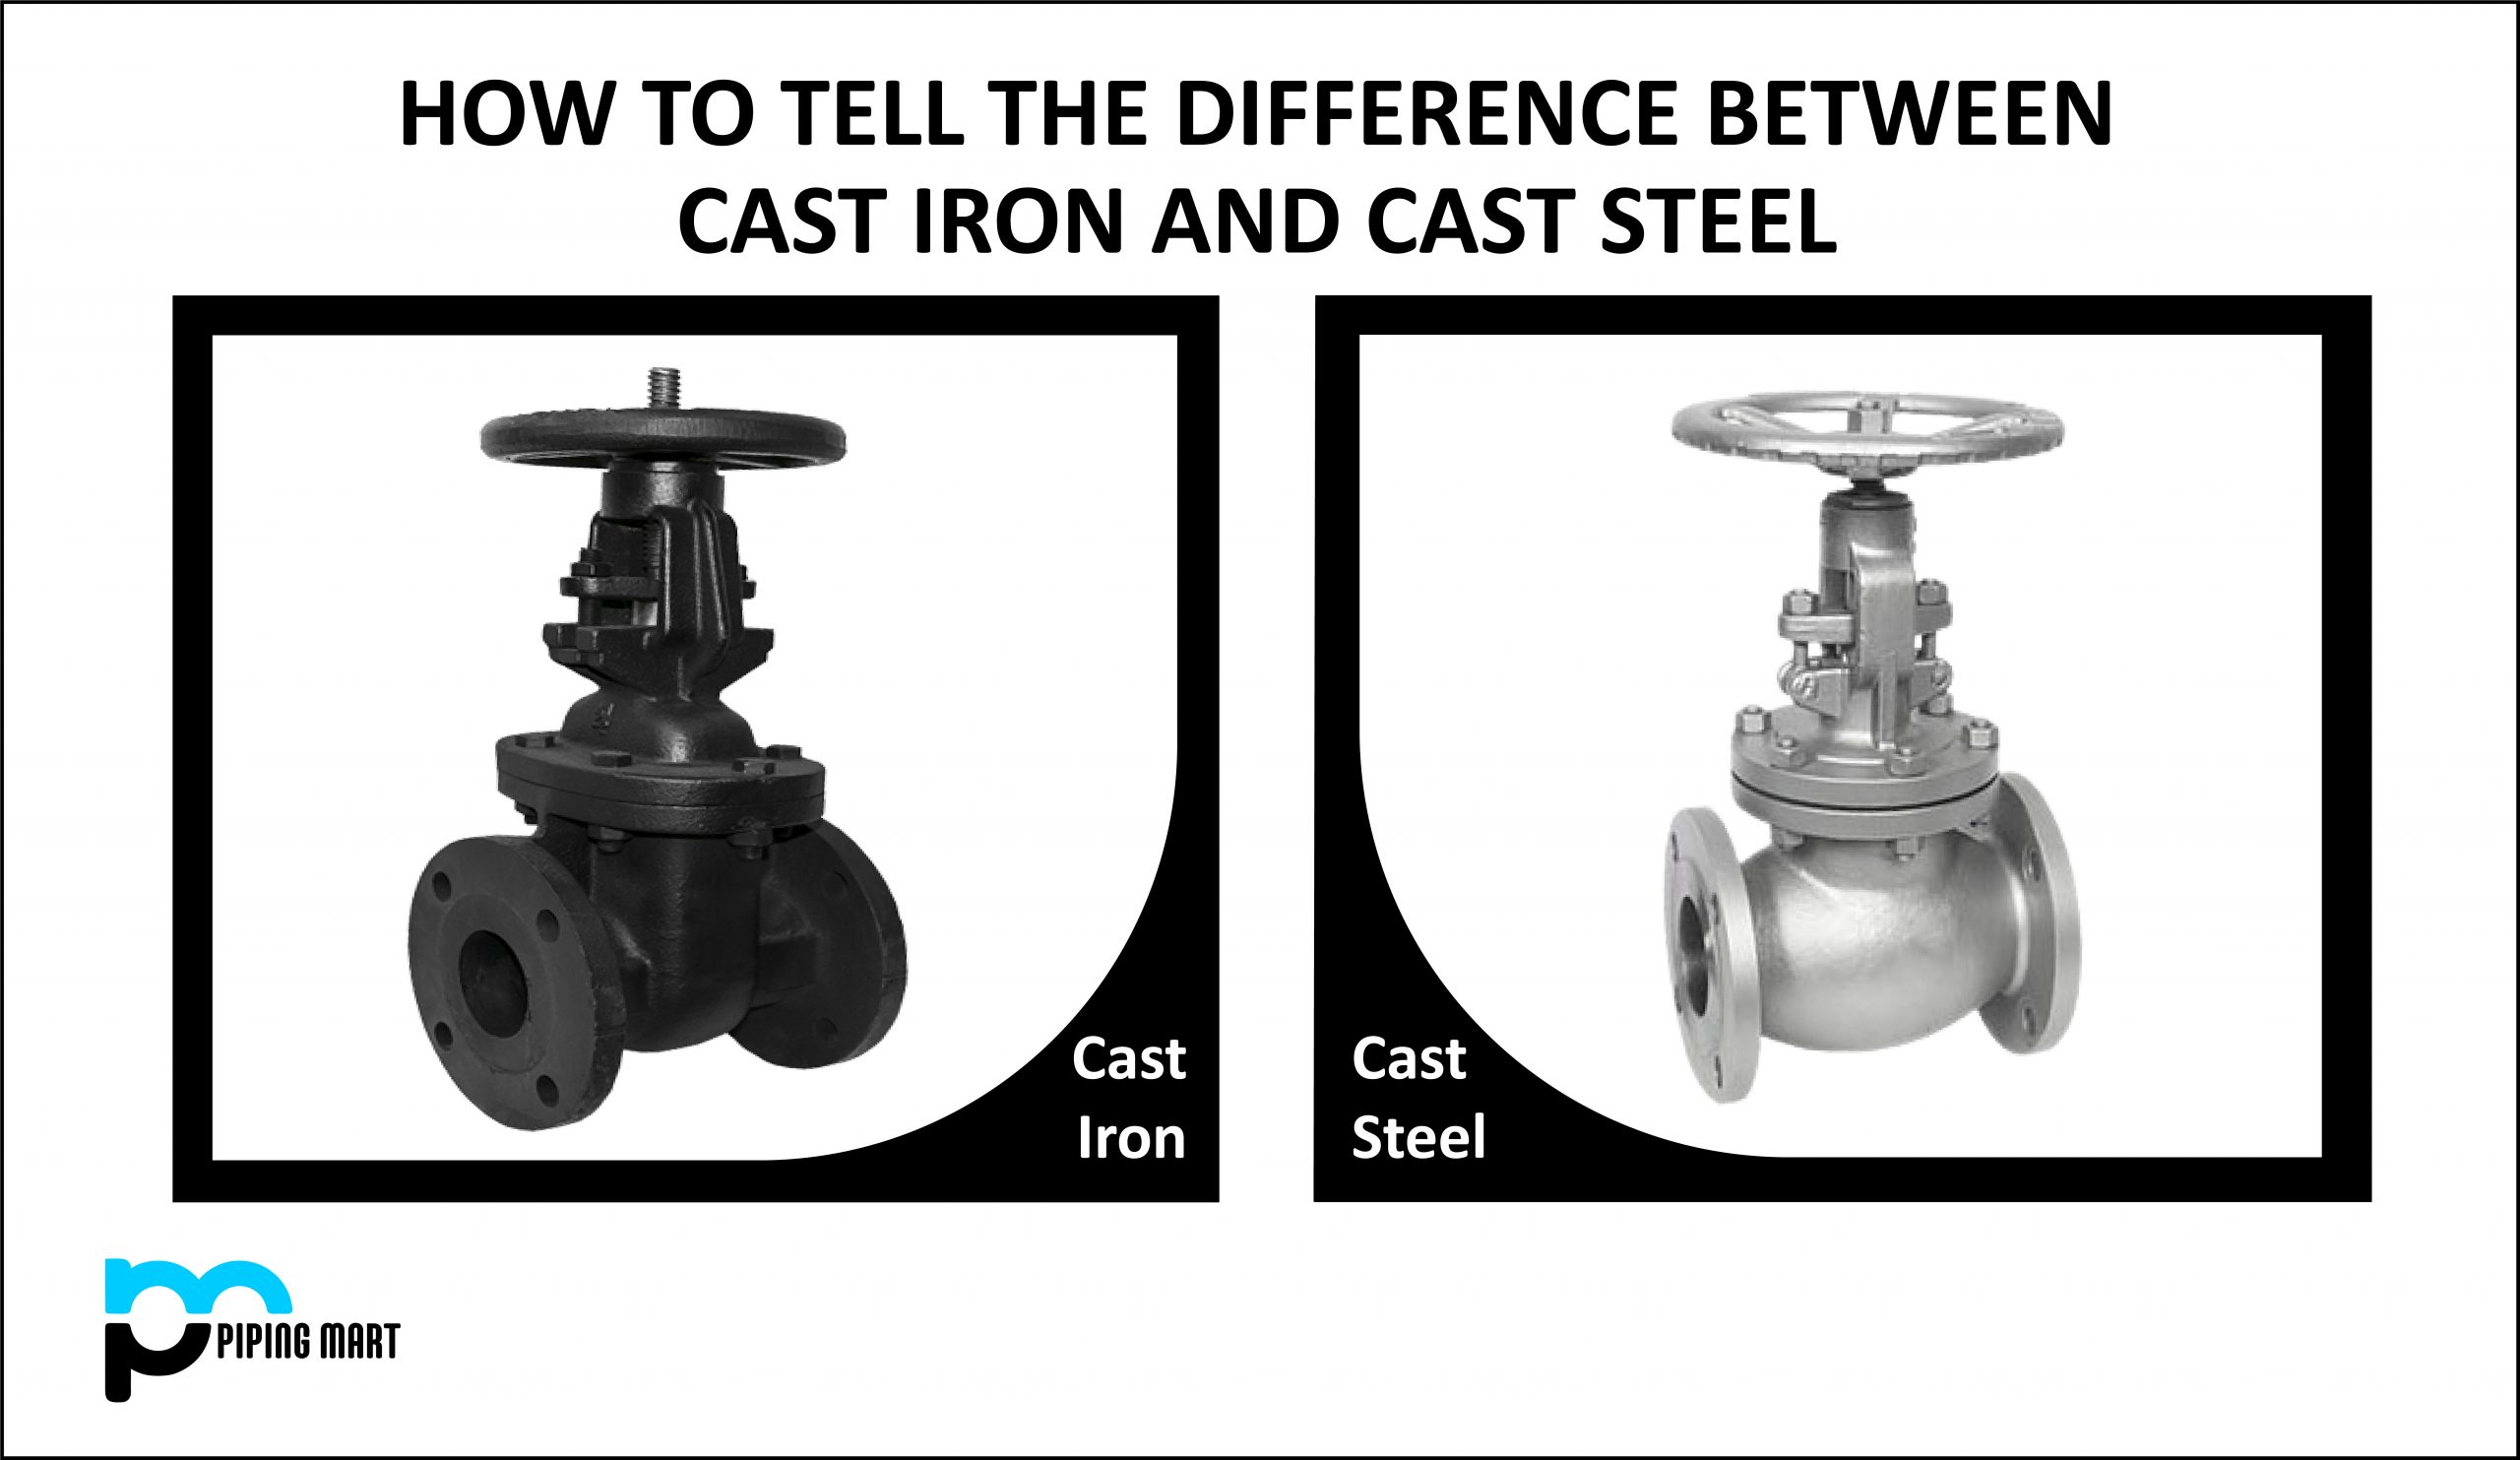 How to Tell the Difference between Cast Iron and Cast Steel